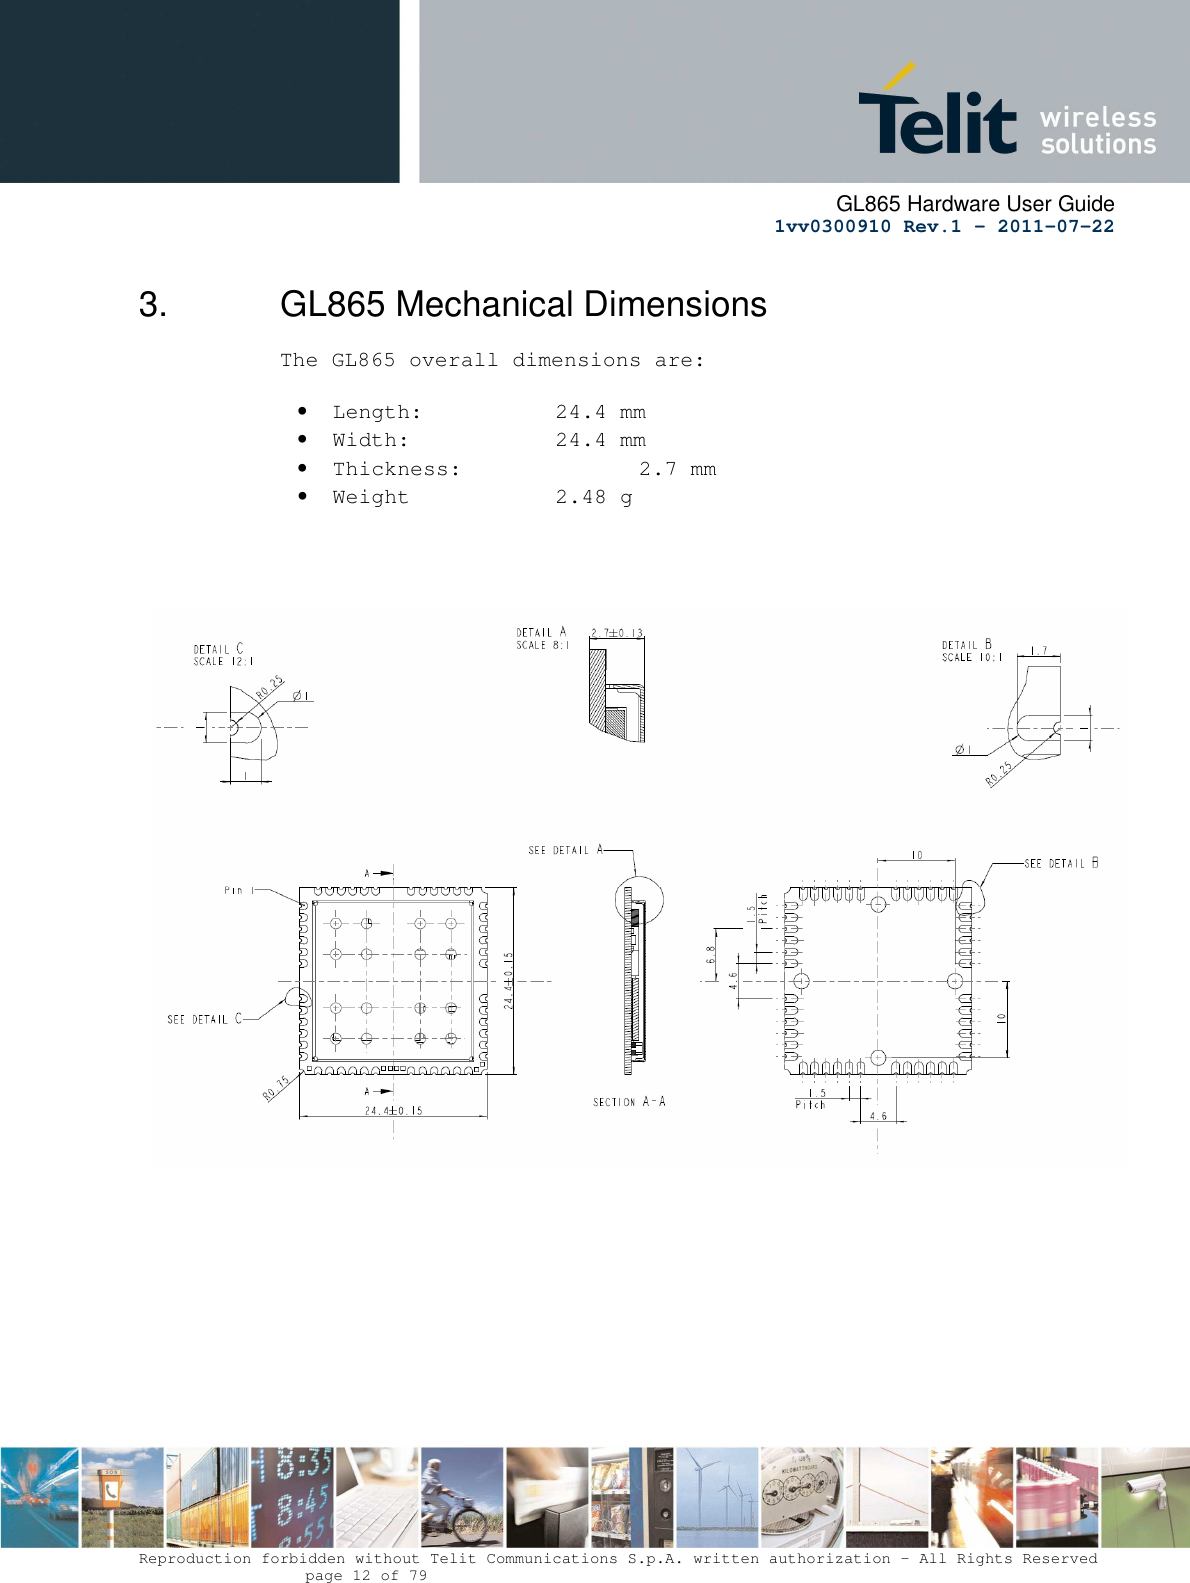      GL865 Hardware User Guide     1vv0300910 Rev.1 – 2011-07-22       Reproduction forbidden without Telit Communications S.p.A. written authorization - All Rights Reserved    page 12 of 79  3.  GL865 Mechanical Dimensions The GL865 overall dimensions are:  • Length:     24.4 mm • Width:     24.4 mm  • Thickness:     2.7 mm • Weight    2.48 g          